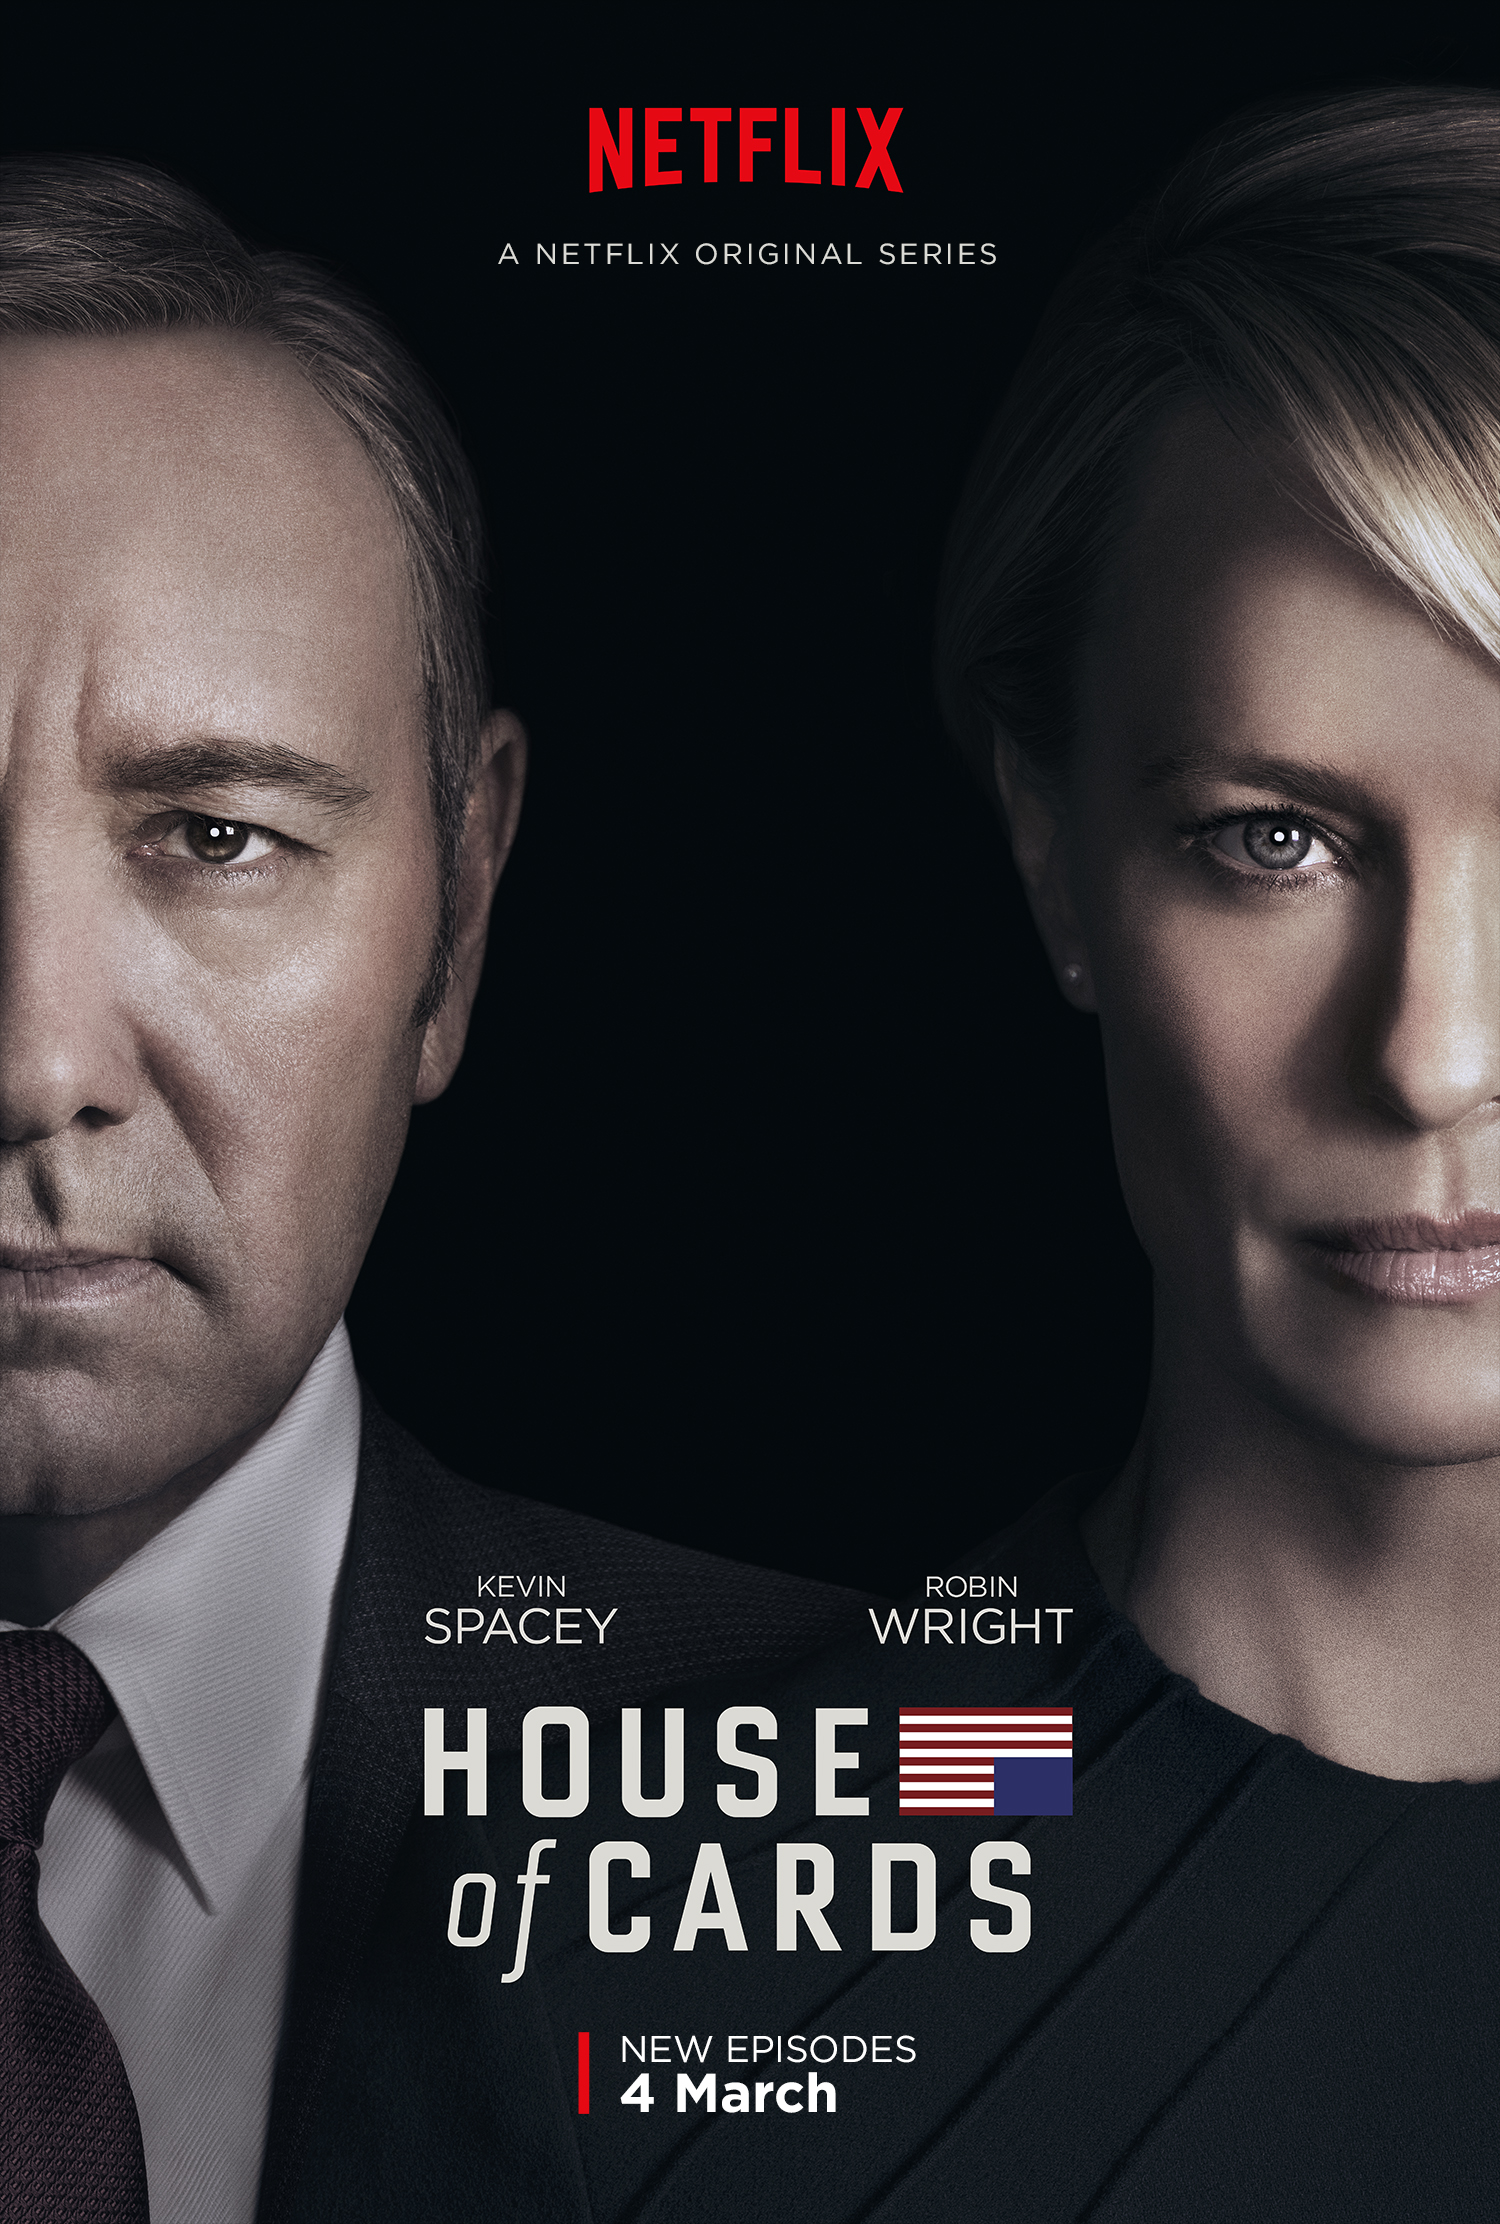 Kevin Spacey and Robin Wright appear in promotional material for 'House of Cards' season 4 